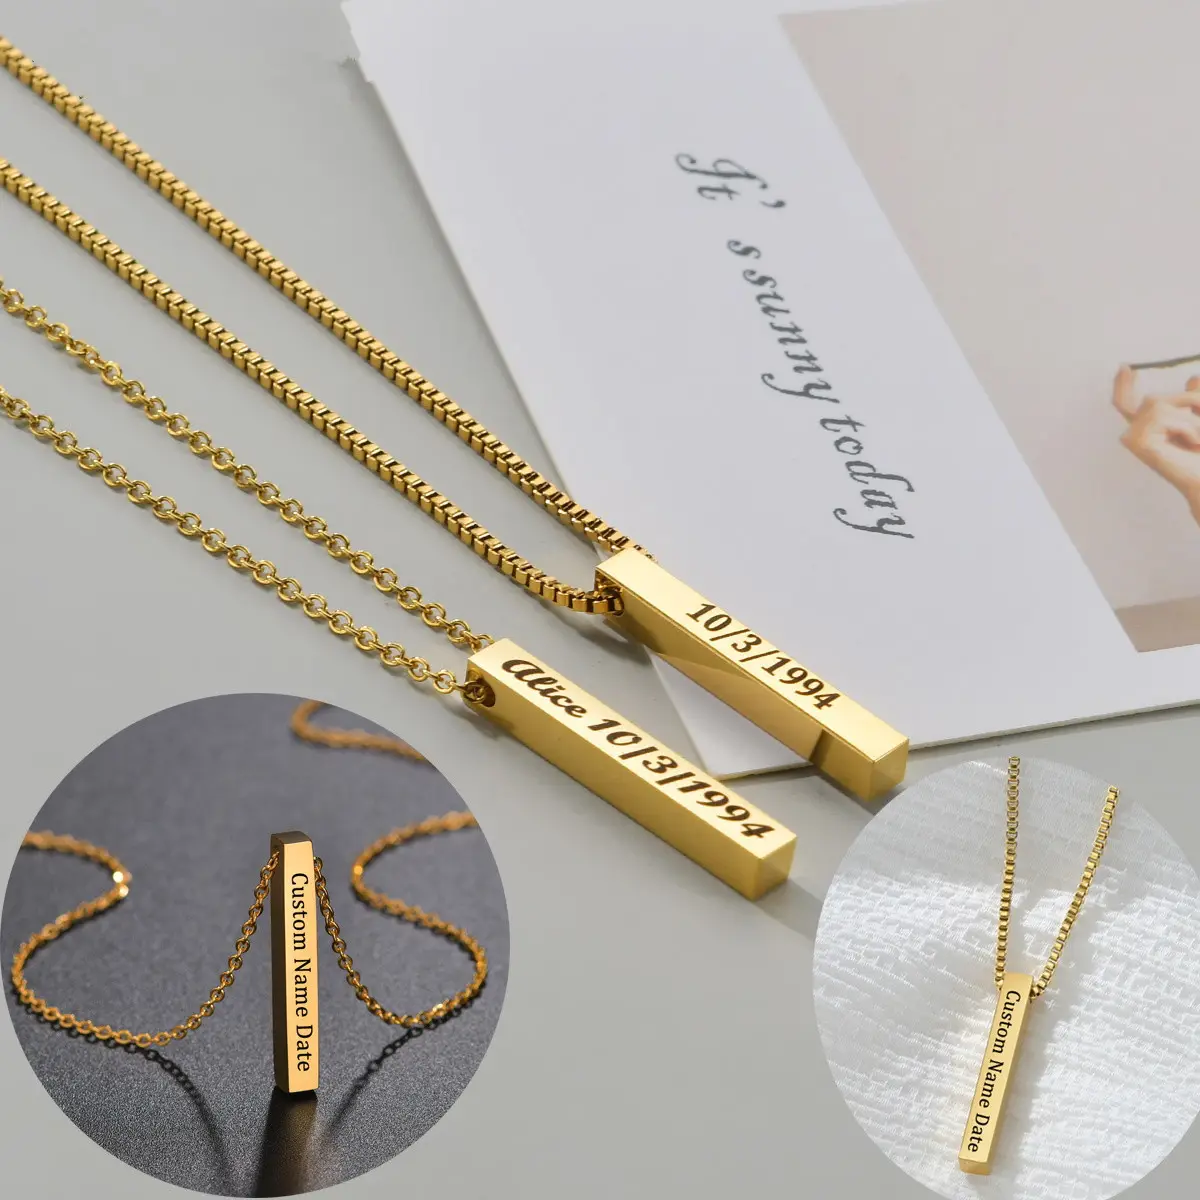 Customized 3D Engraved Name and Date Necklace with Long Rectangular Stainless Steel Pendant